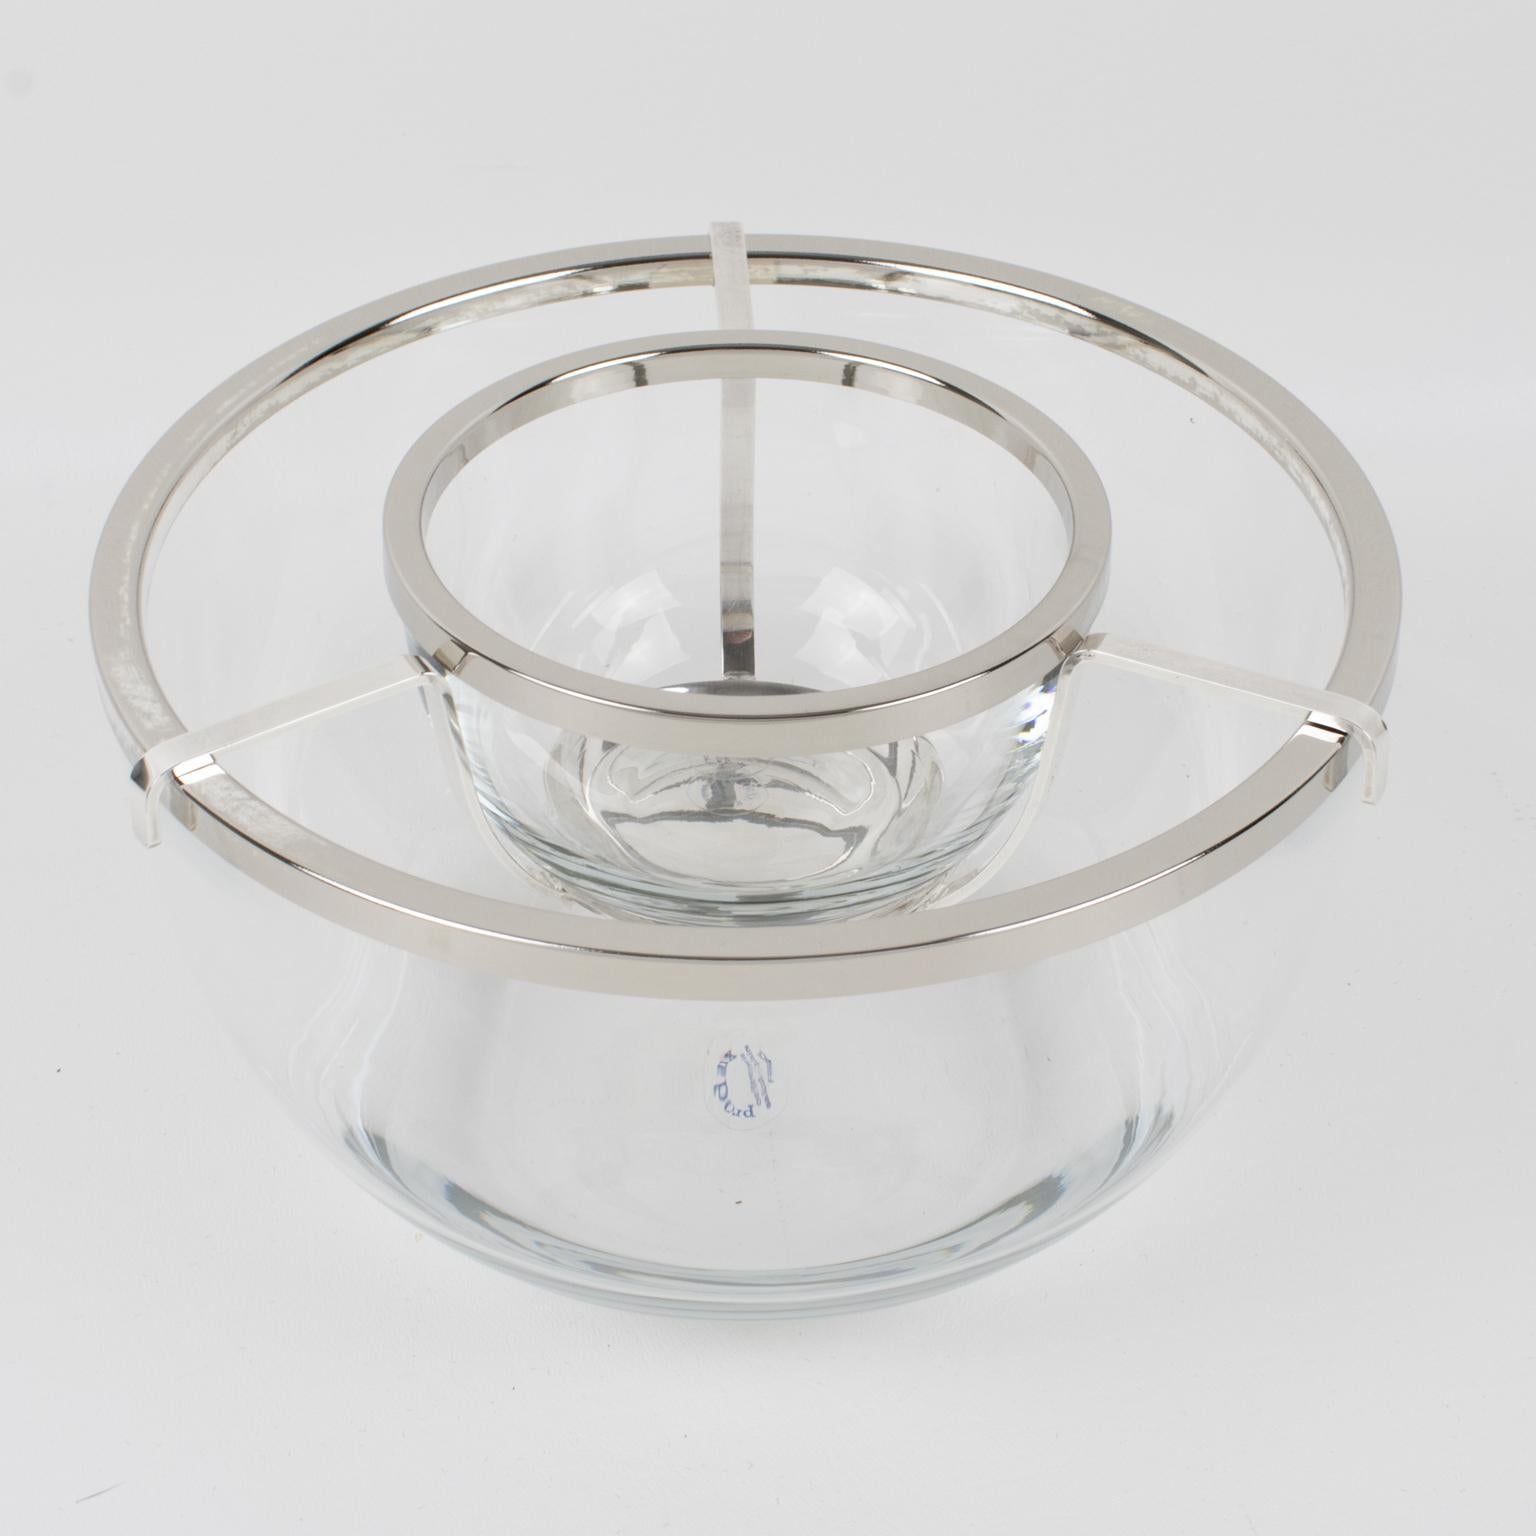 Modern French Silver Plate and Crystal Caviar Bowl Dish Server by Produx Paris